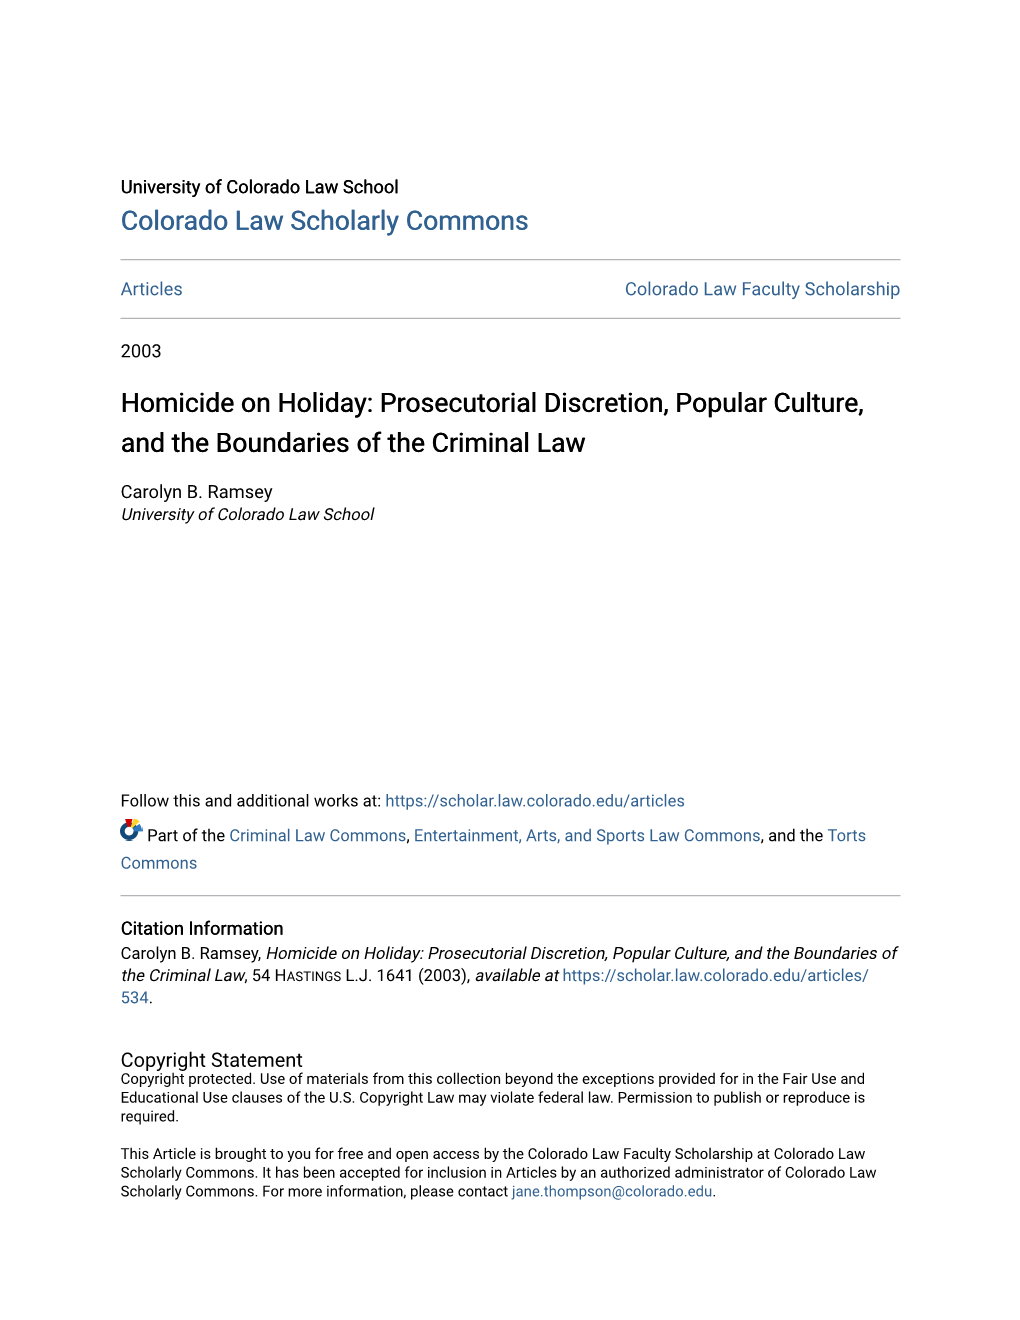 Homicide on Holiday: Prosecutorial Discretion, Popular Culture, and the Boundaries of the Criminal Law